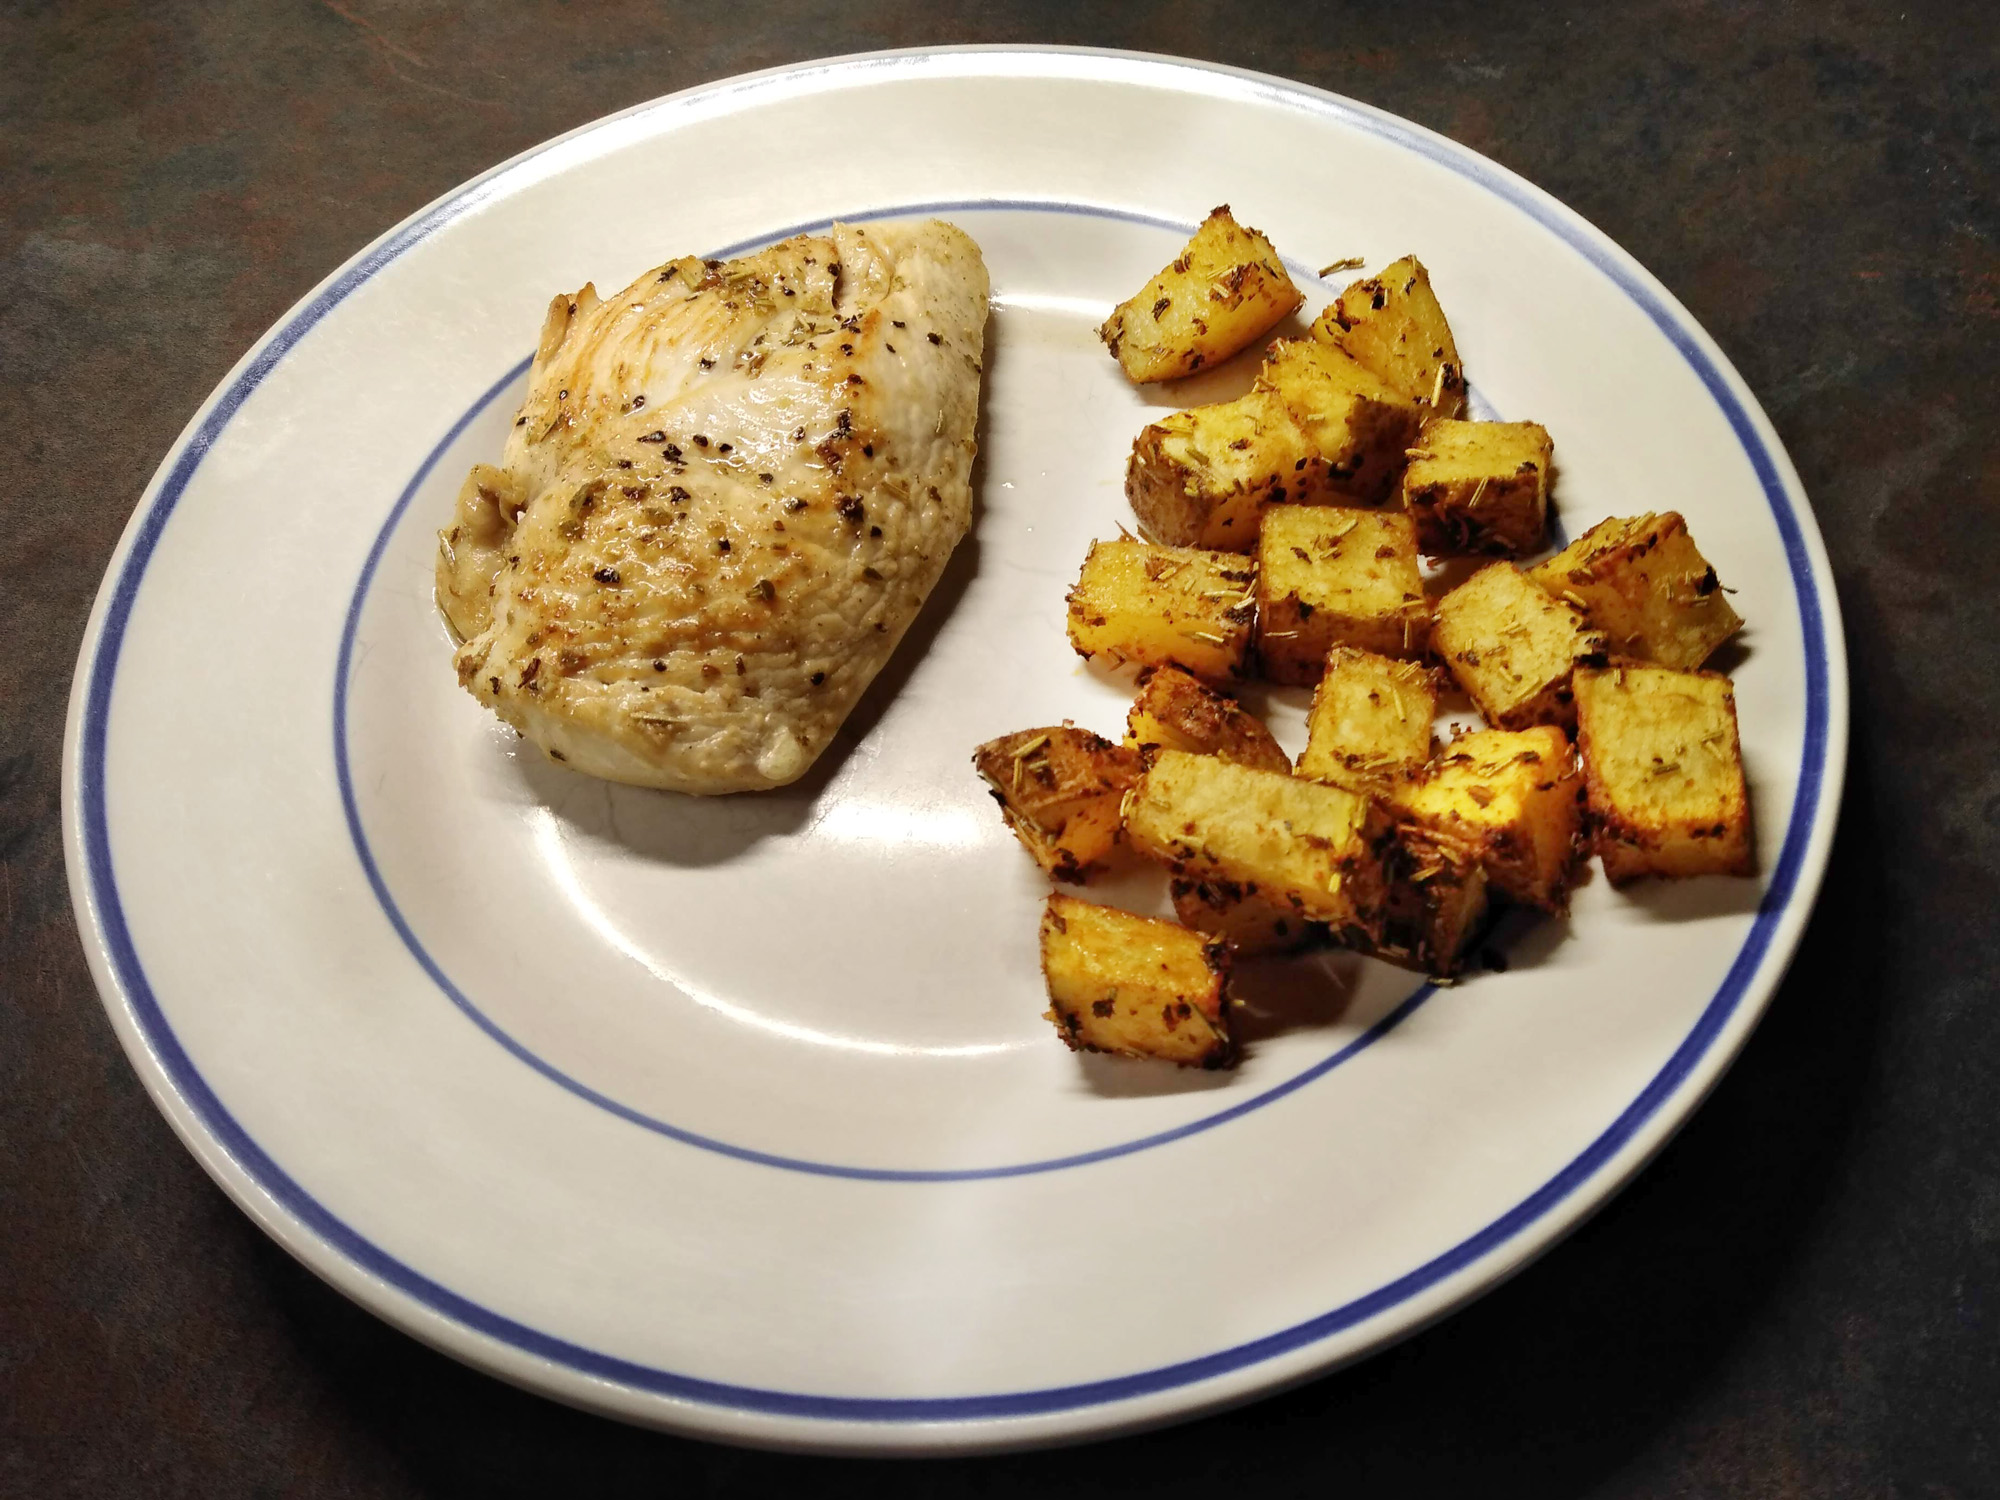 Oven Roasted Potatoes with Garlic Butter Skillet Chicken